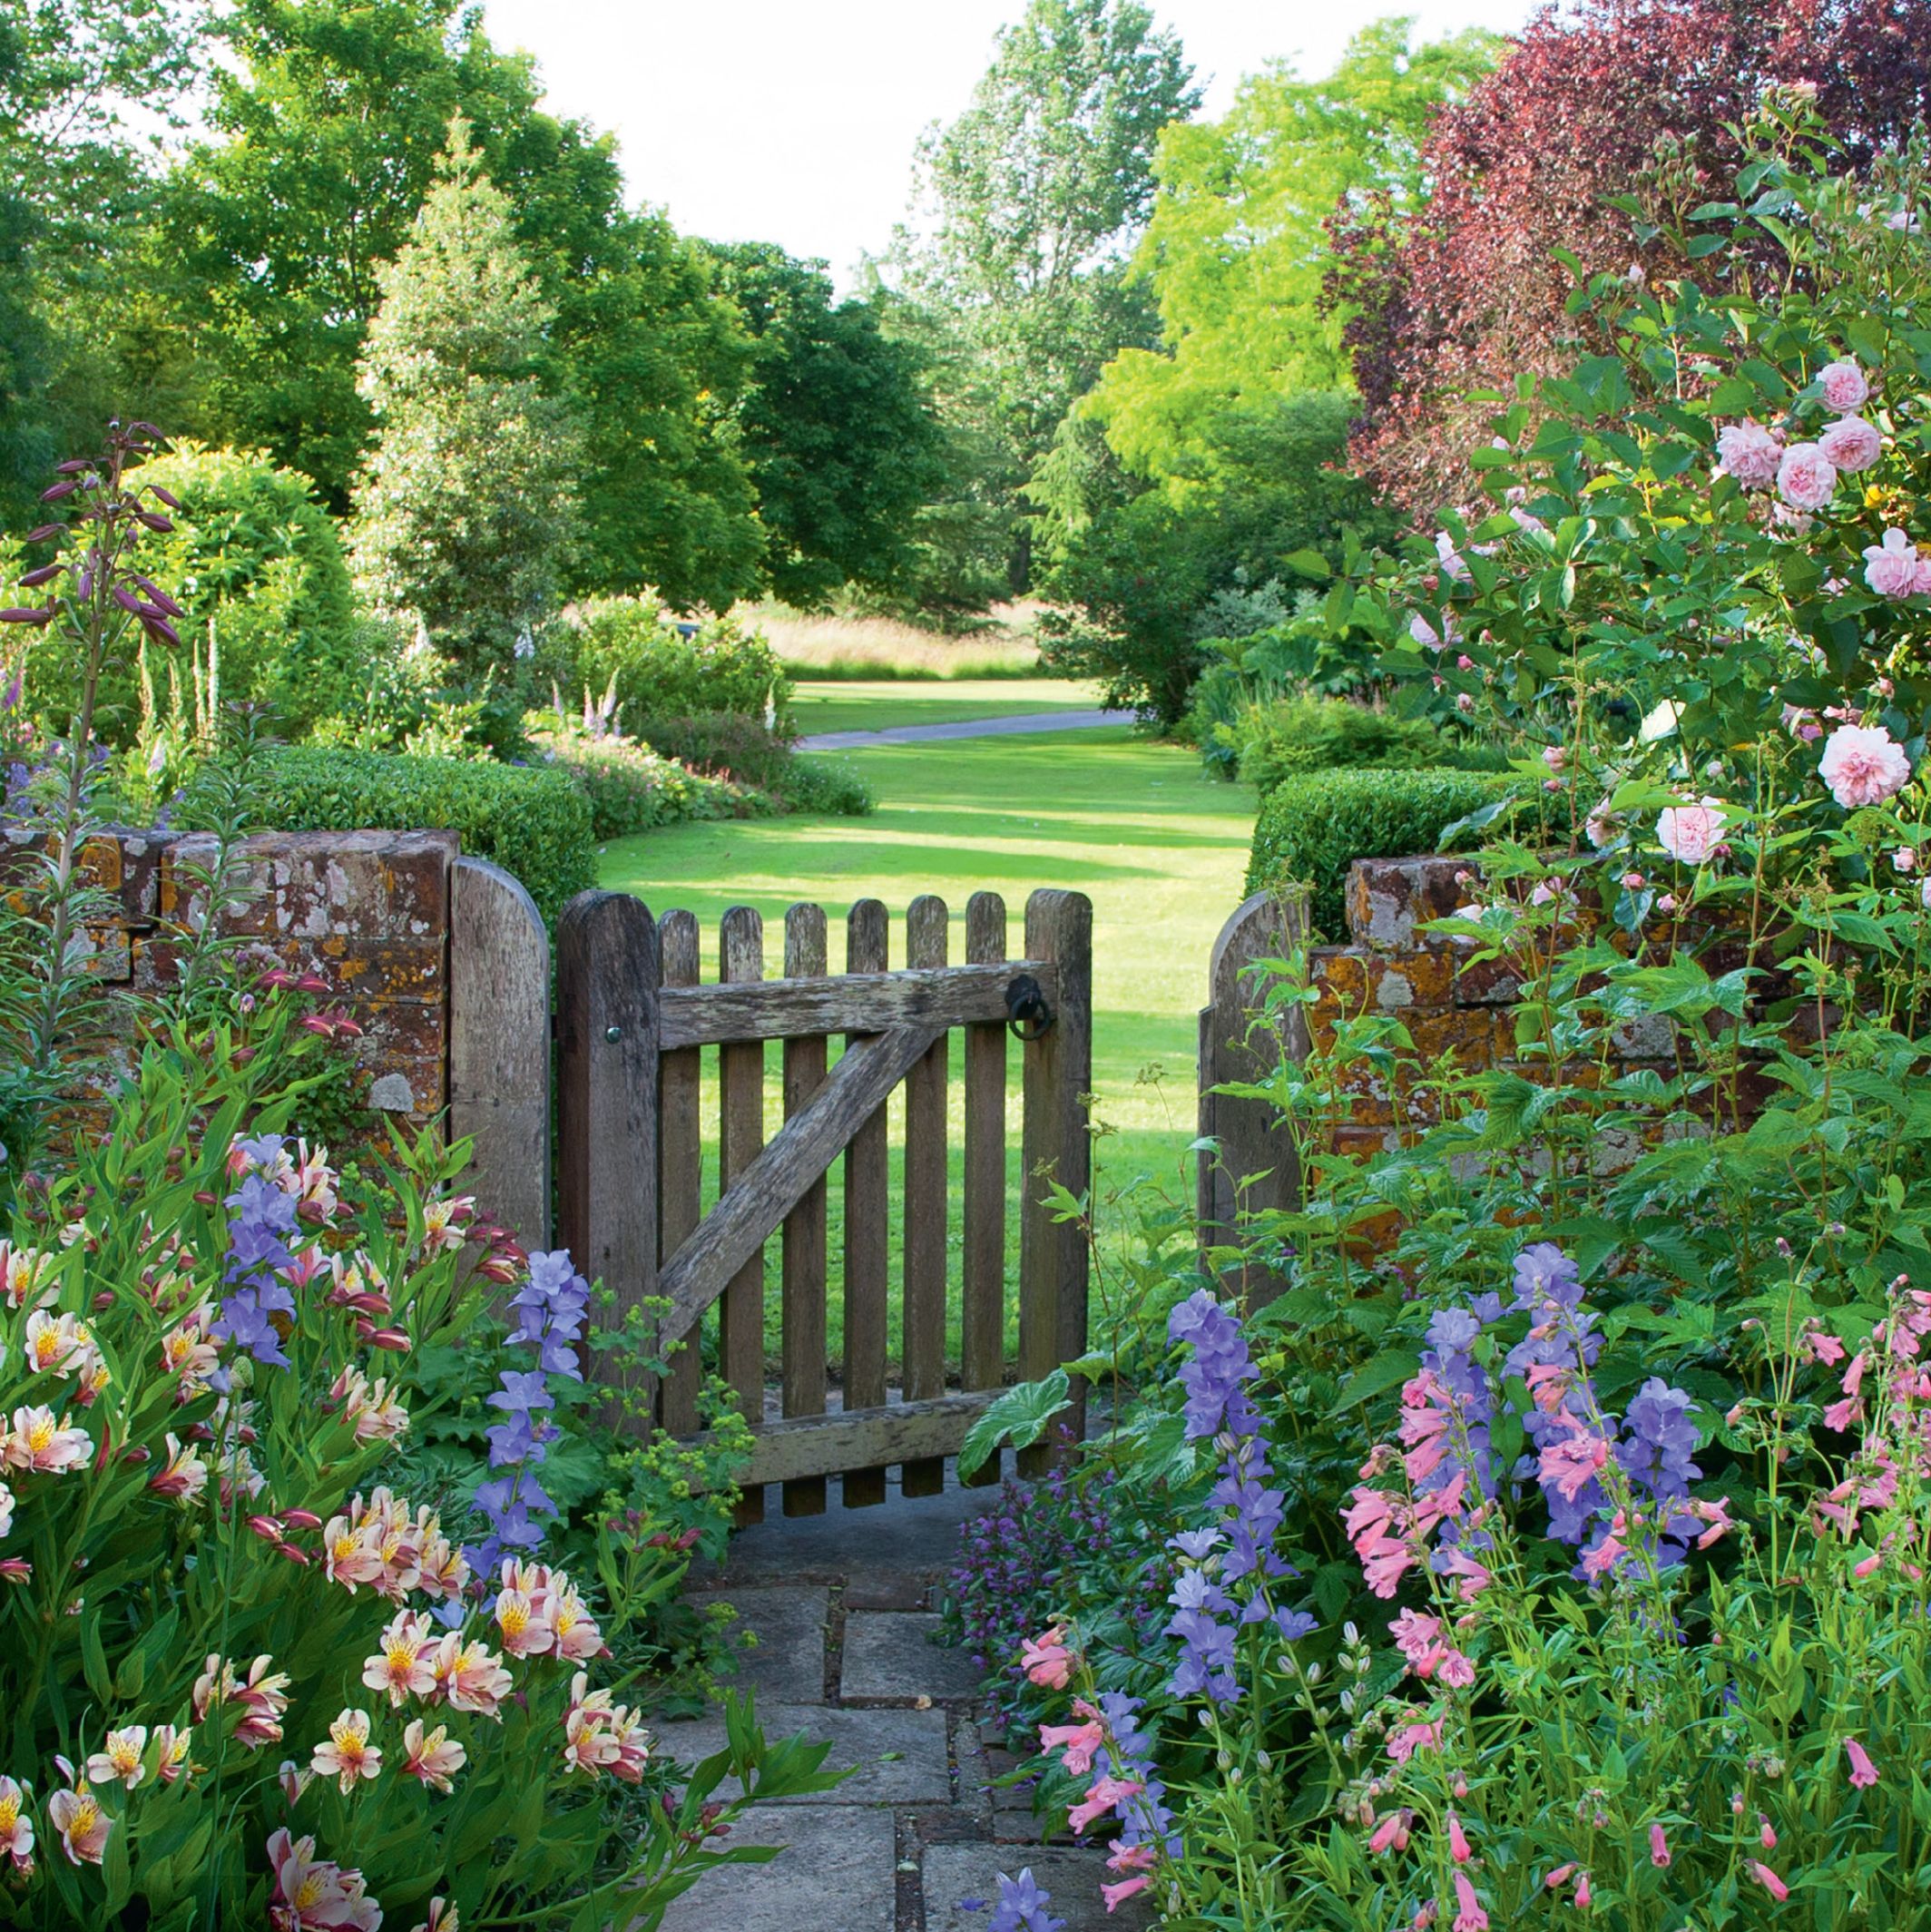 8 Ways To Recreate The Cottage Garden, How To Make An English Cottage Garden